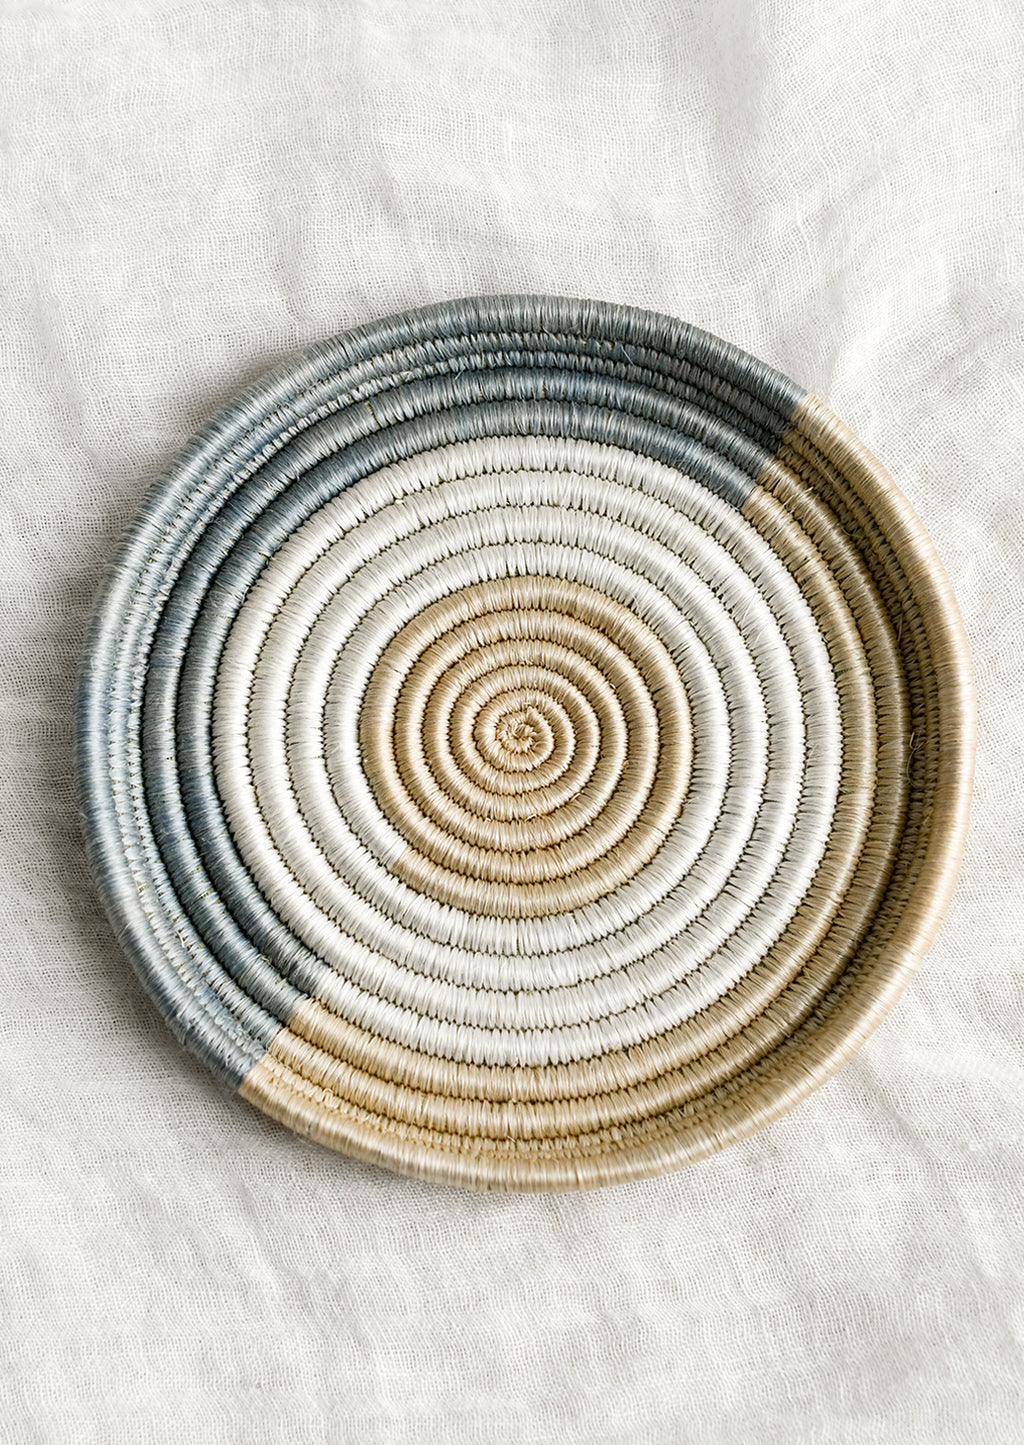 Dusty Blue / Sand / White: A round, shallow sweetgrass tray in dusty blue, white and tan.